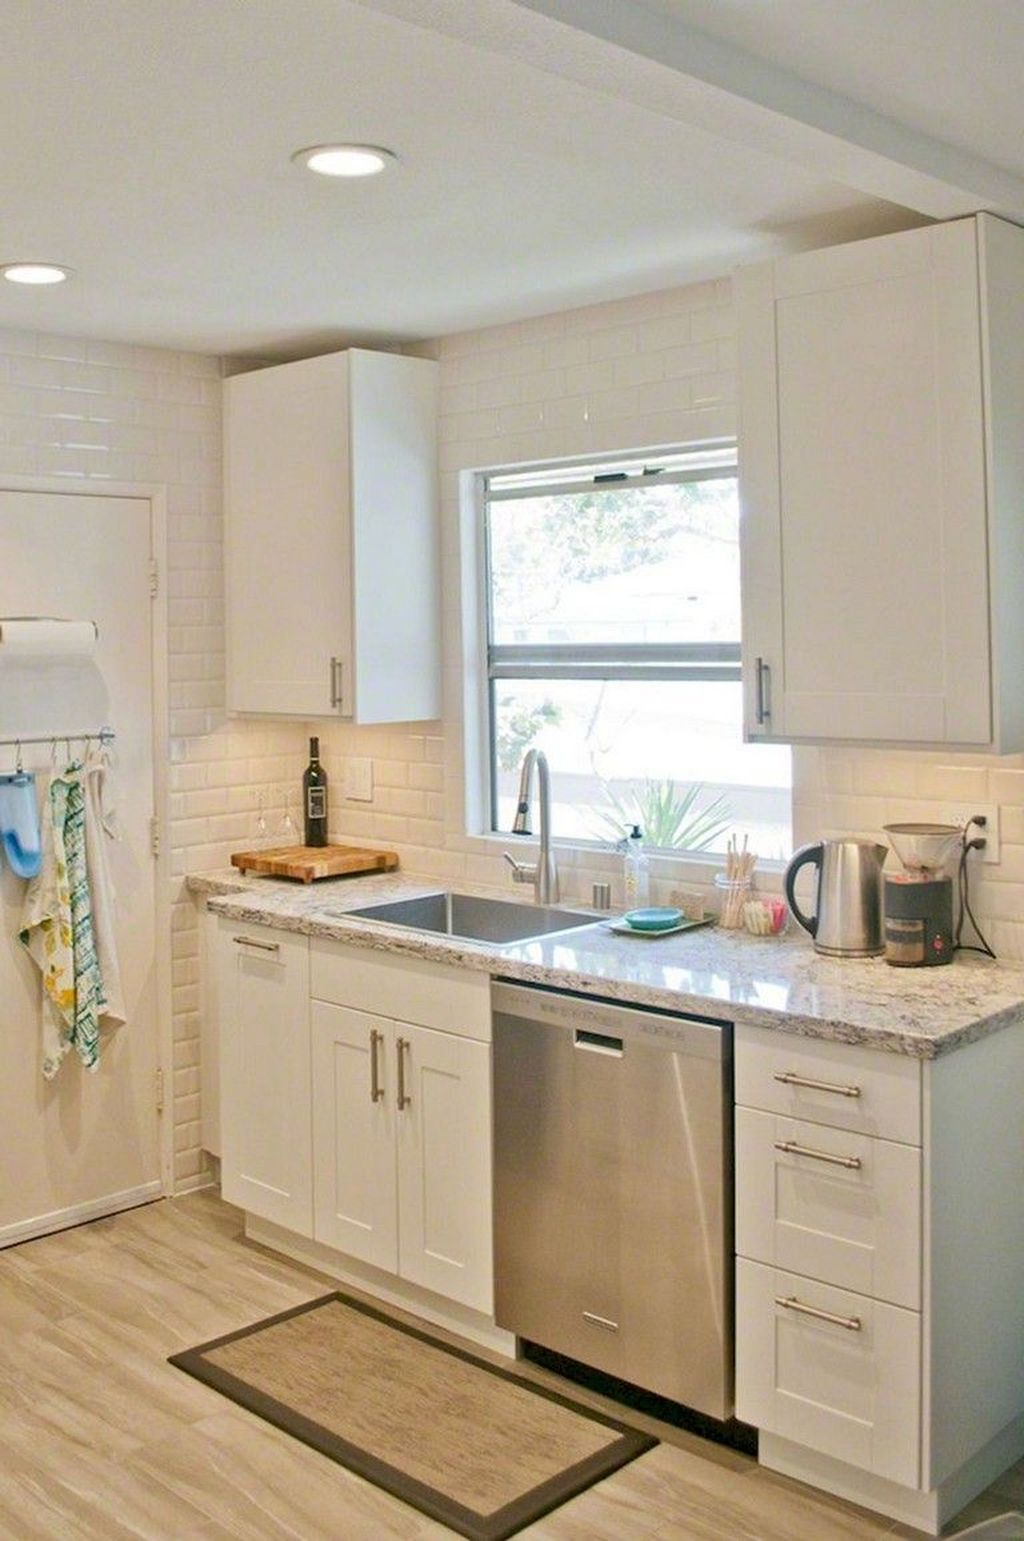 Best Small Kitchen Remodel Design Ideas That Low Cost And Easy To Copy 17